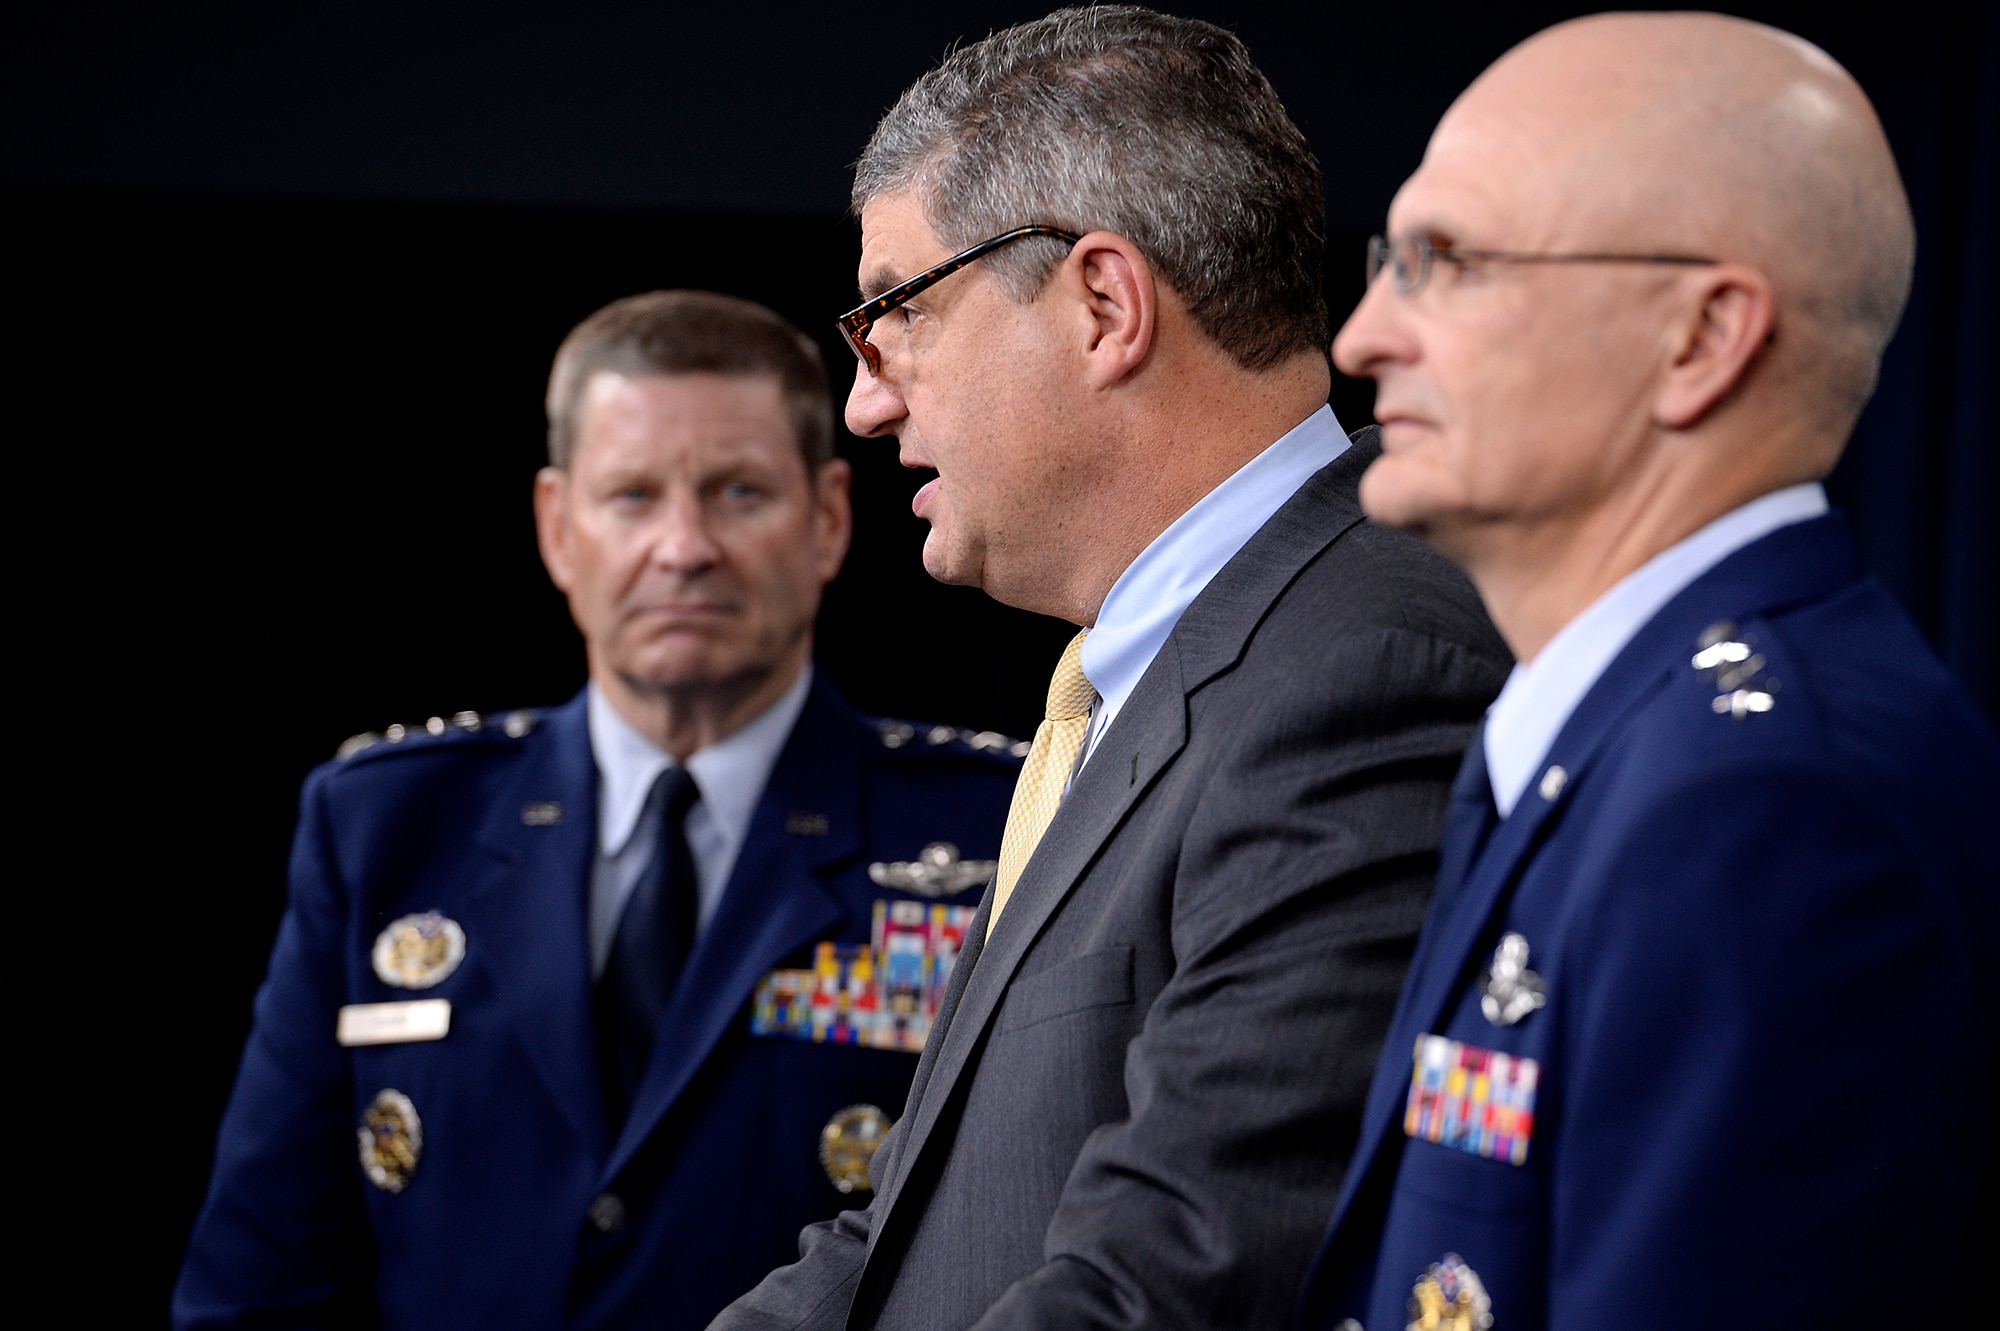 Dr. Bill LaPlante, the assistant secretary of the Air Force for acquisition, answers questions after Secretary of the Air Force Deborah Lee James and Air Force Chief of Staff Gen. Mark A. Welsh III announced he award of the long range strike bomber contract in the Pentagon during a press briefing, Oct. 27, 2015.  With LaPlante are Gen. Robin Rand, commander of Air Force Global Strike Command, and Lt. Gen. Arnold Bunch Jr., the military deputy for the Office of the Assistant Secretary of the Air Force for Acquisition.  (U.S. Air Force photo/Scott M. Ash)